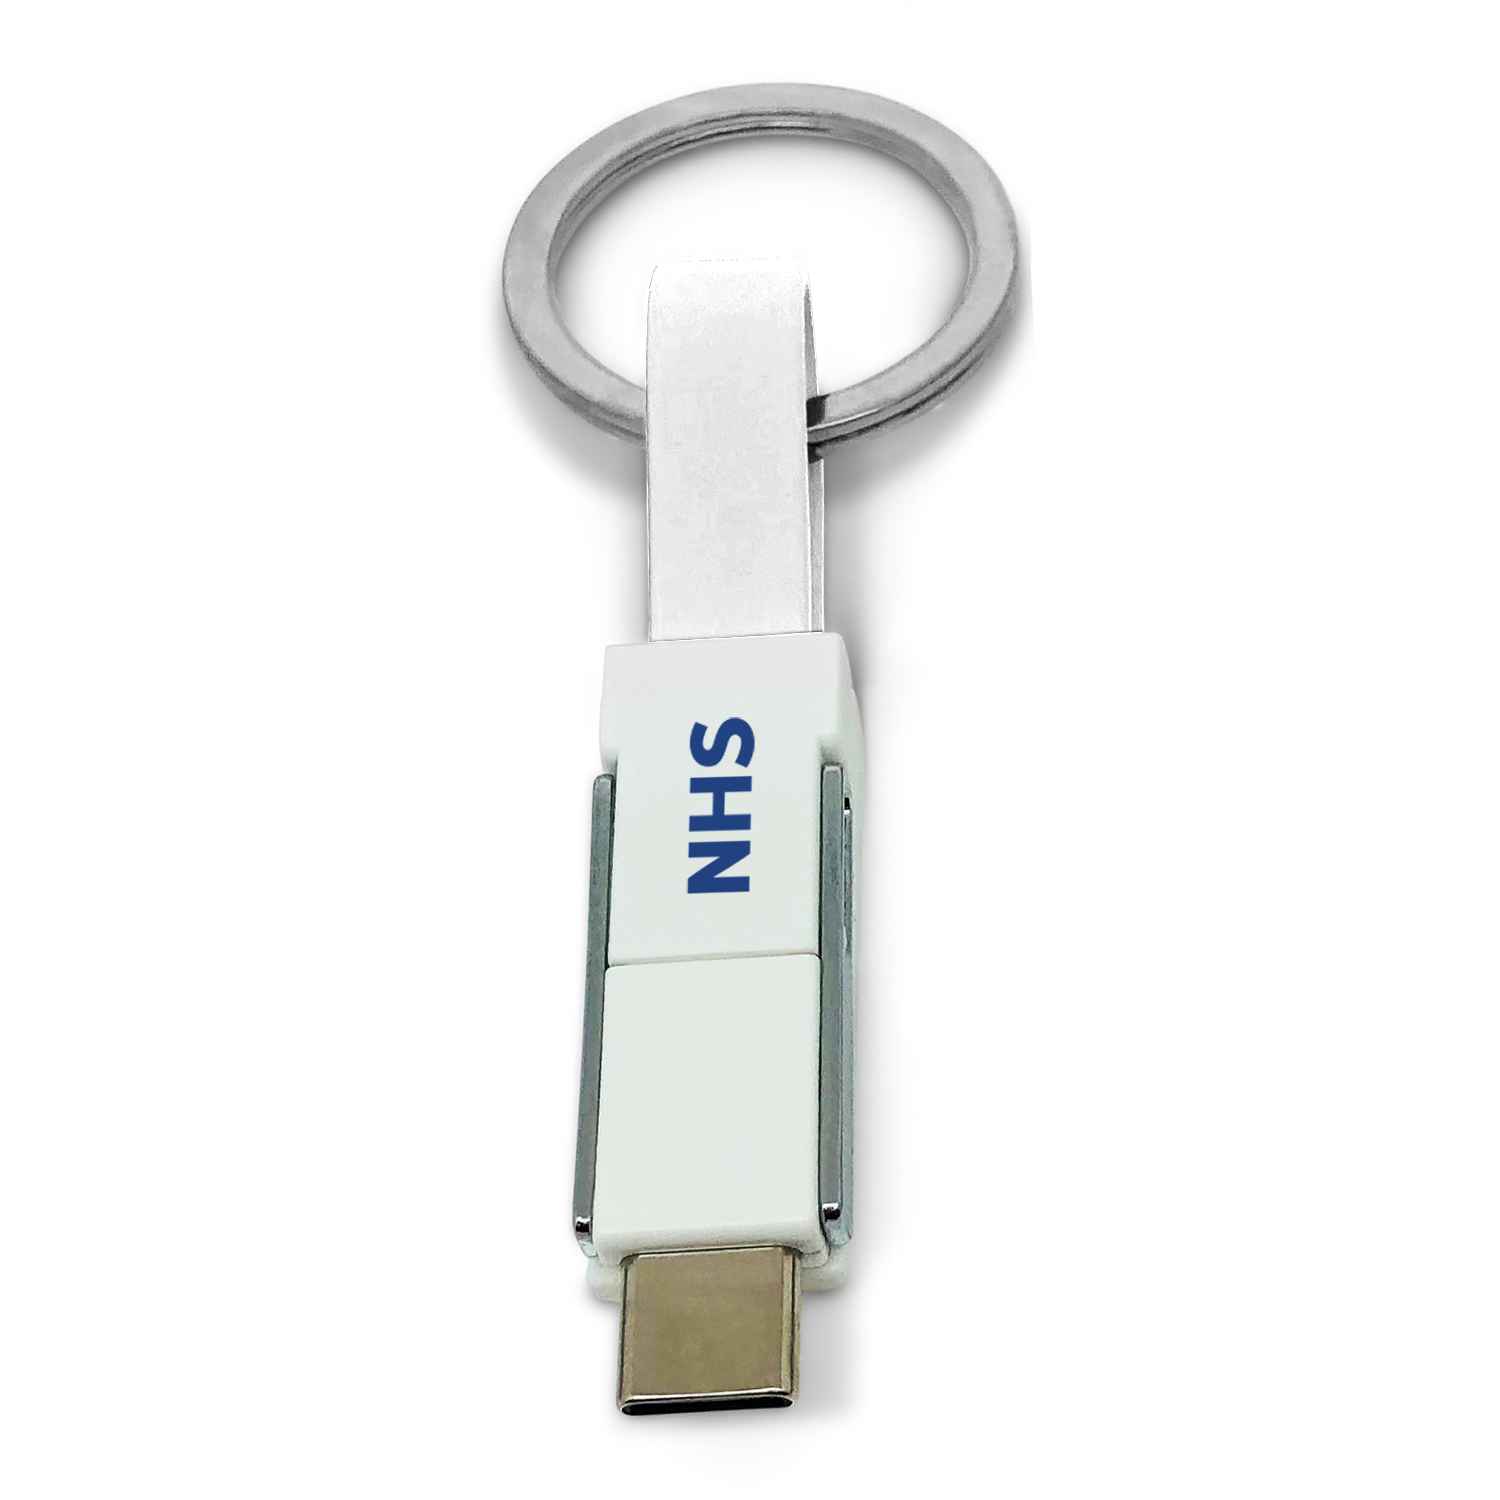 3-in-1 Keyring Charging Cable